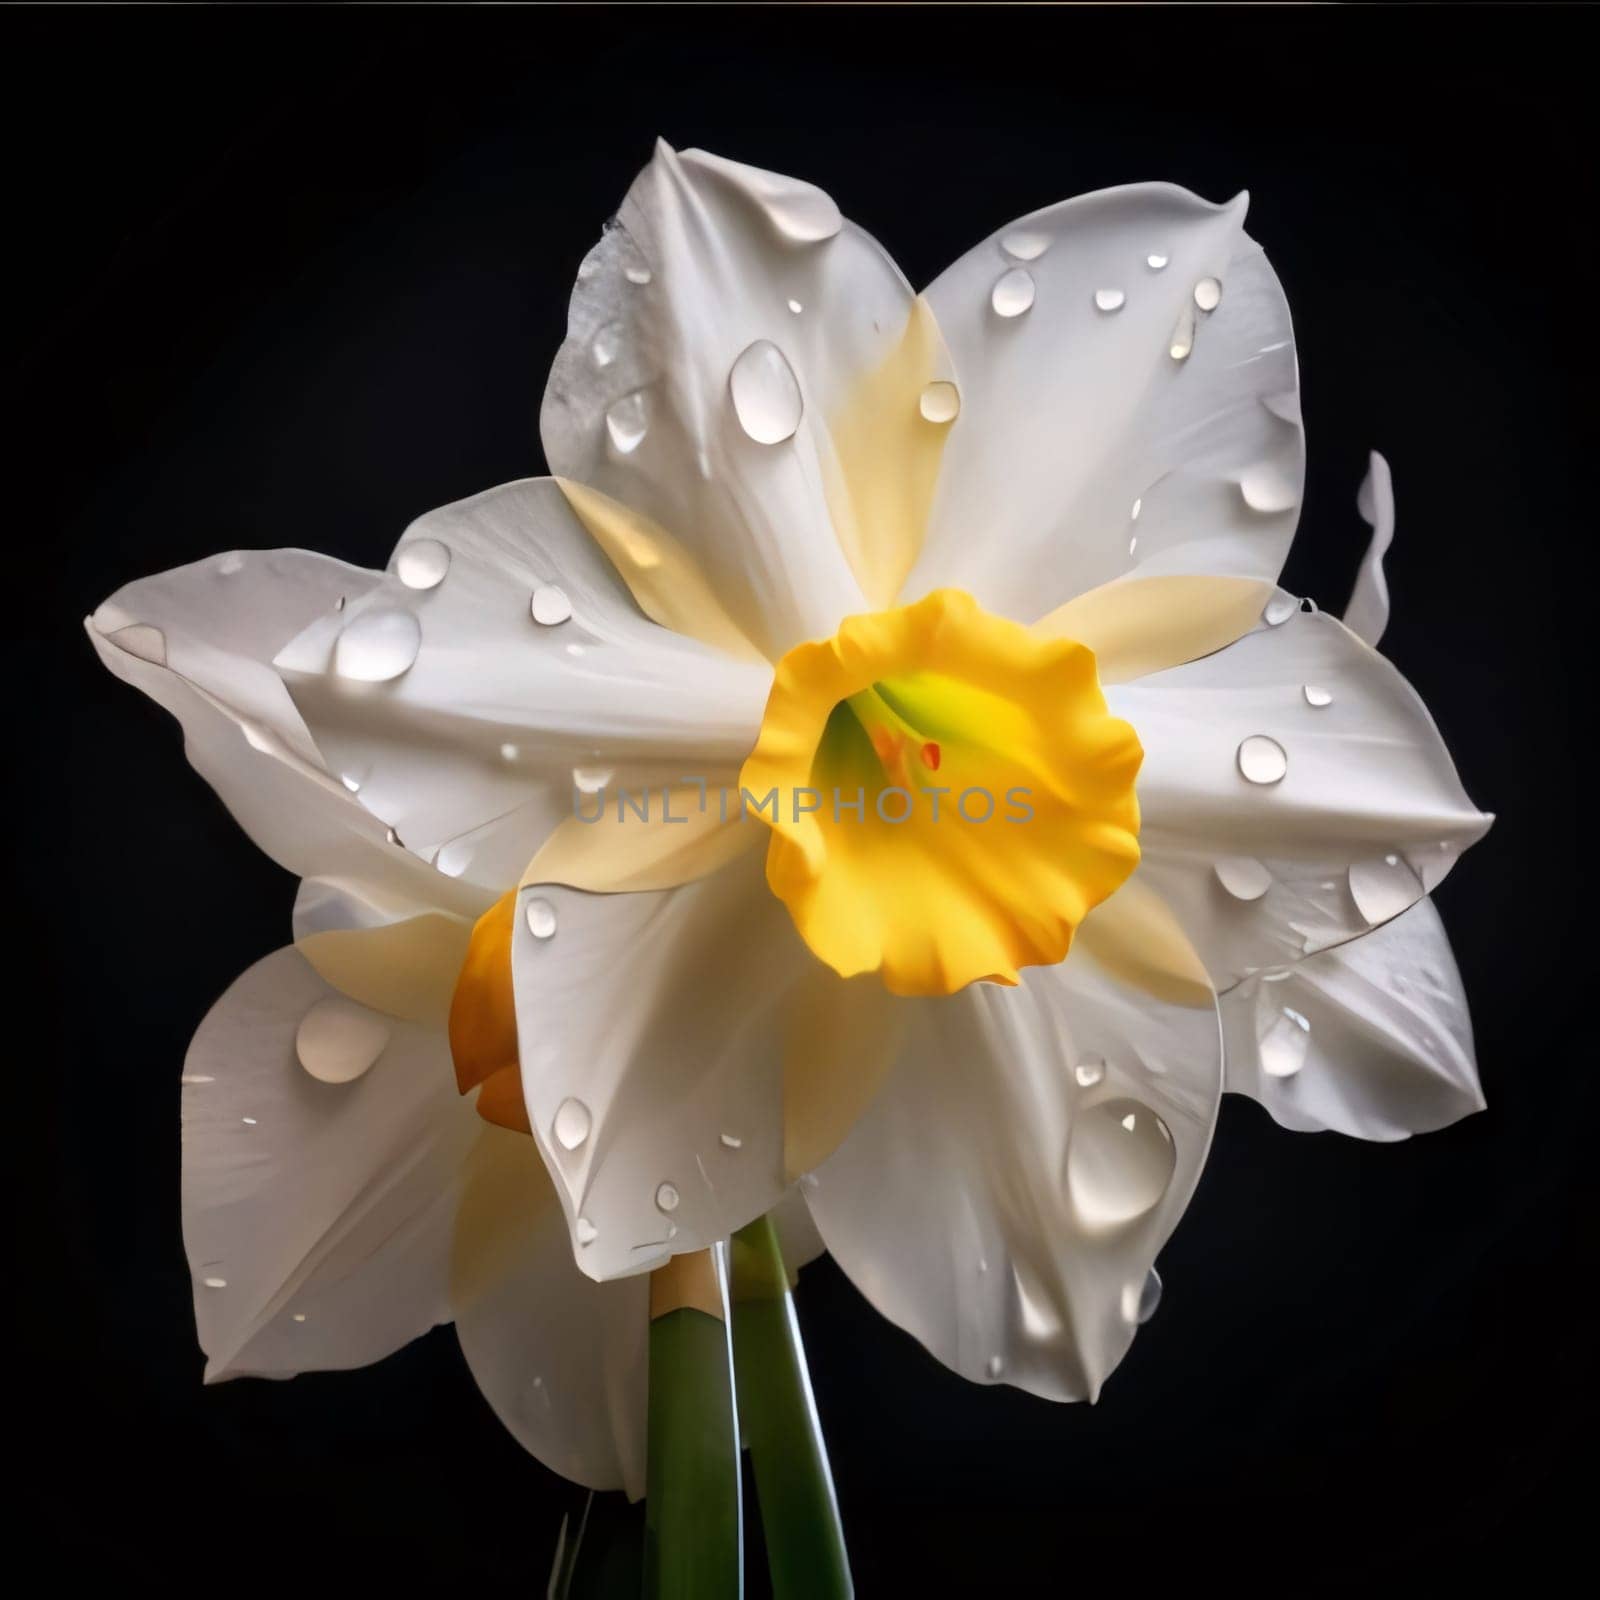 White daffodil flower isolated on black background. Flowering flowers, a symbol of spring, new life. A joyful time of nature waking up to life.